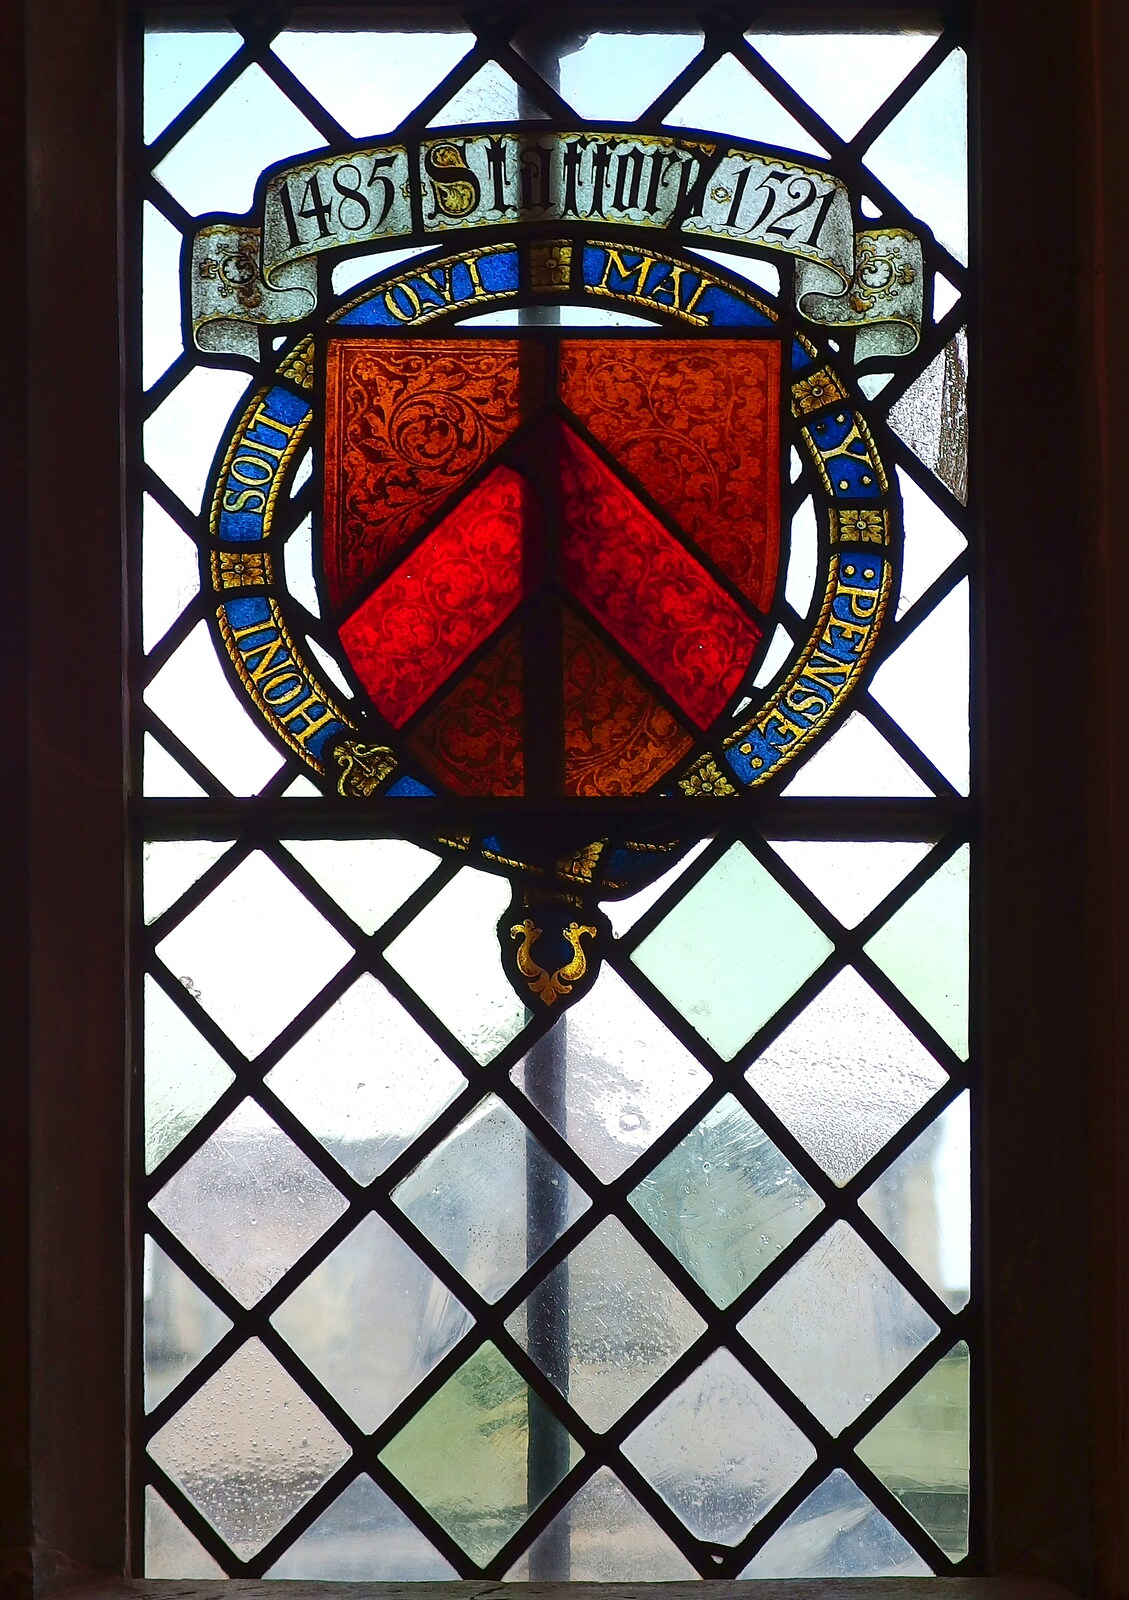 Stained glass from 1521 from The BBs at Hengrave Hall, Hengrave, Suffolk - 18th August 2013